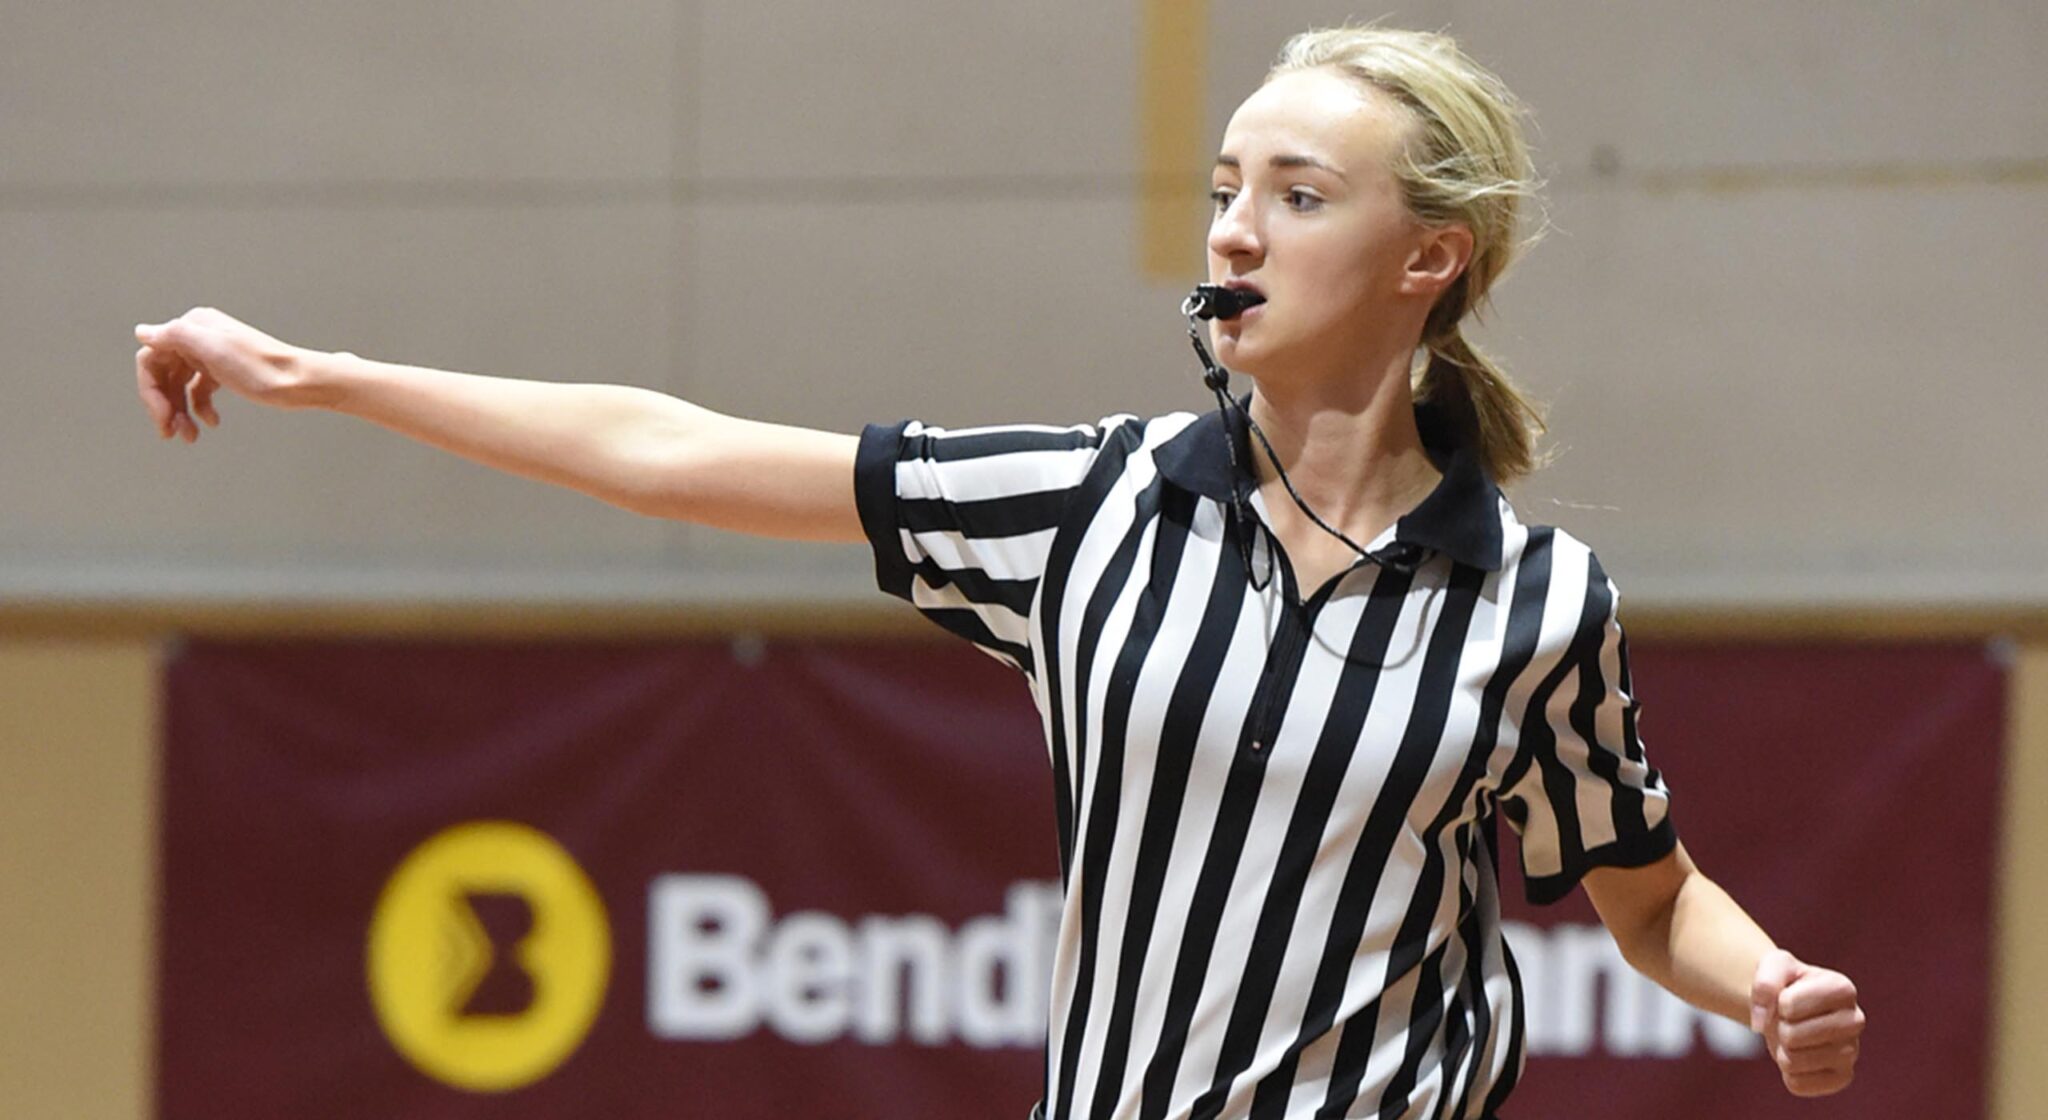 basketball-referee-roles-and-responsibilities-realhoopers